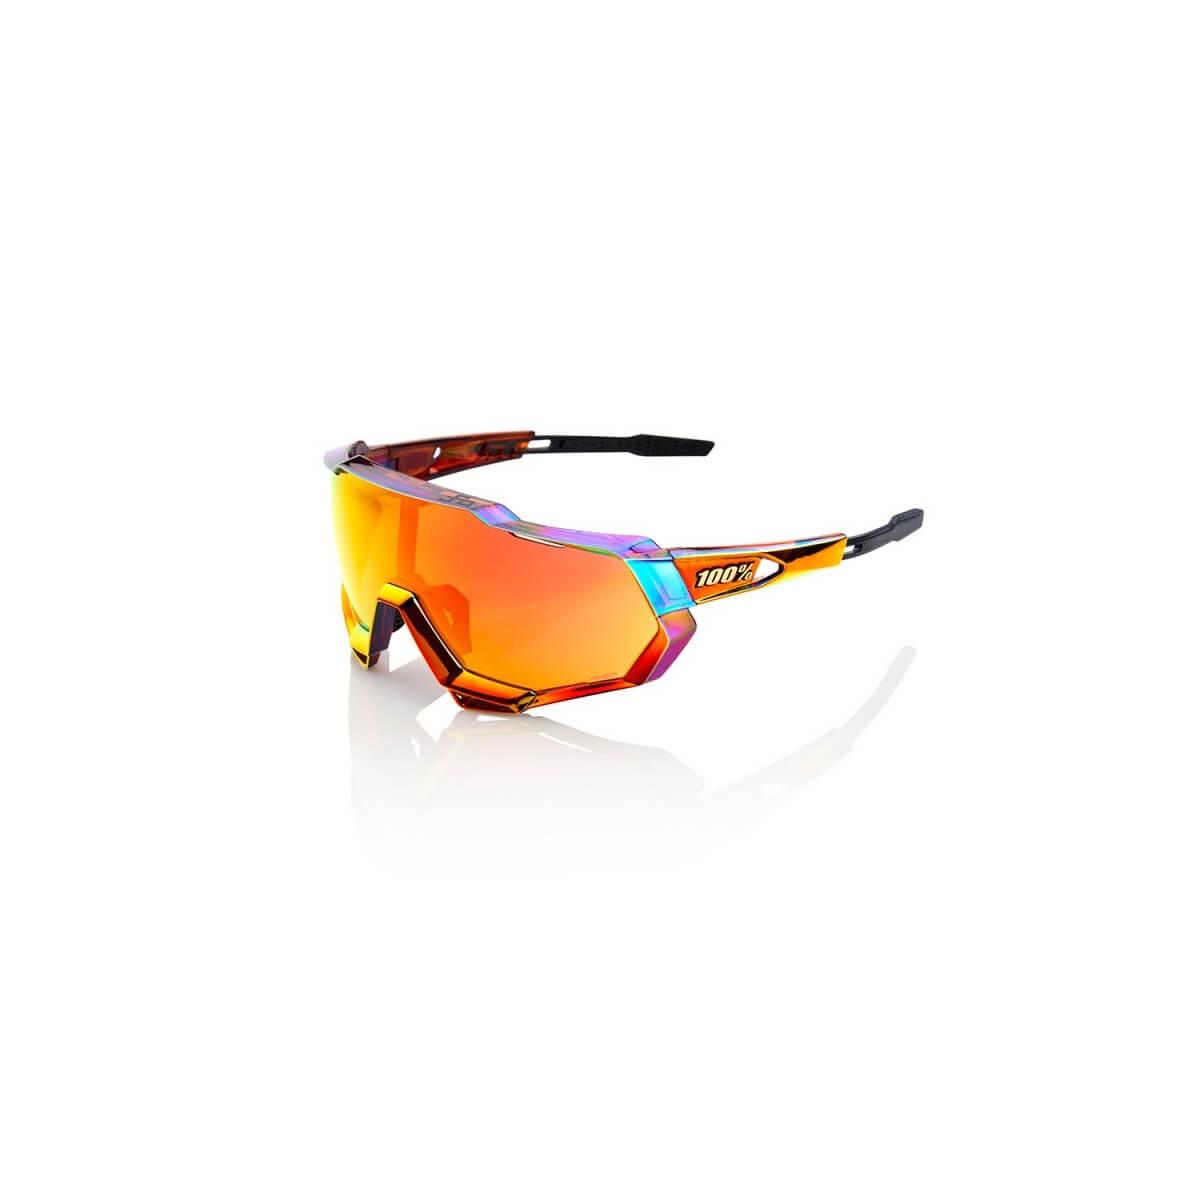 Glasses 100% SPEEDTRAP PETER SAGAN LIMITED EDITION (HD MULTILAYER RED MIRROR LENS)